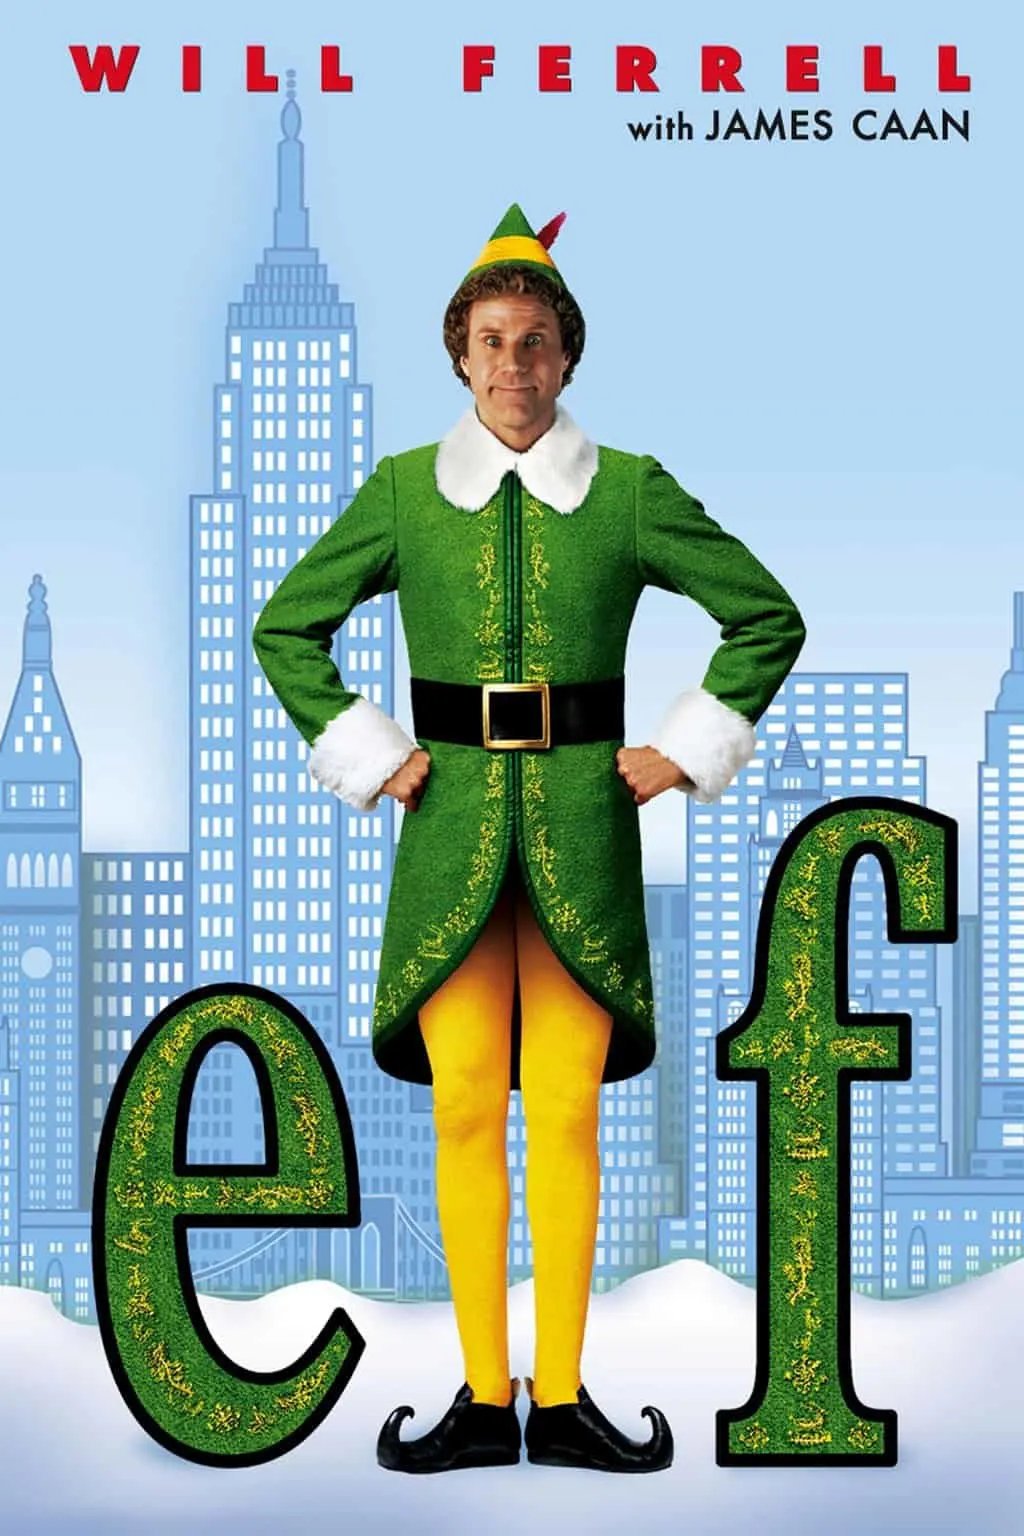 What age is elf for?